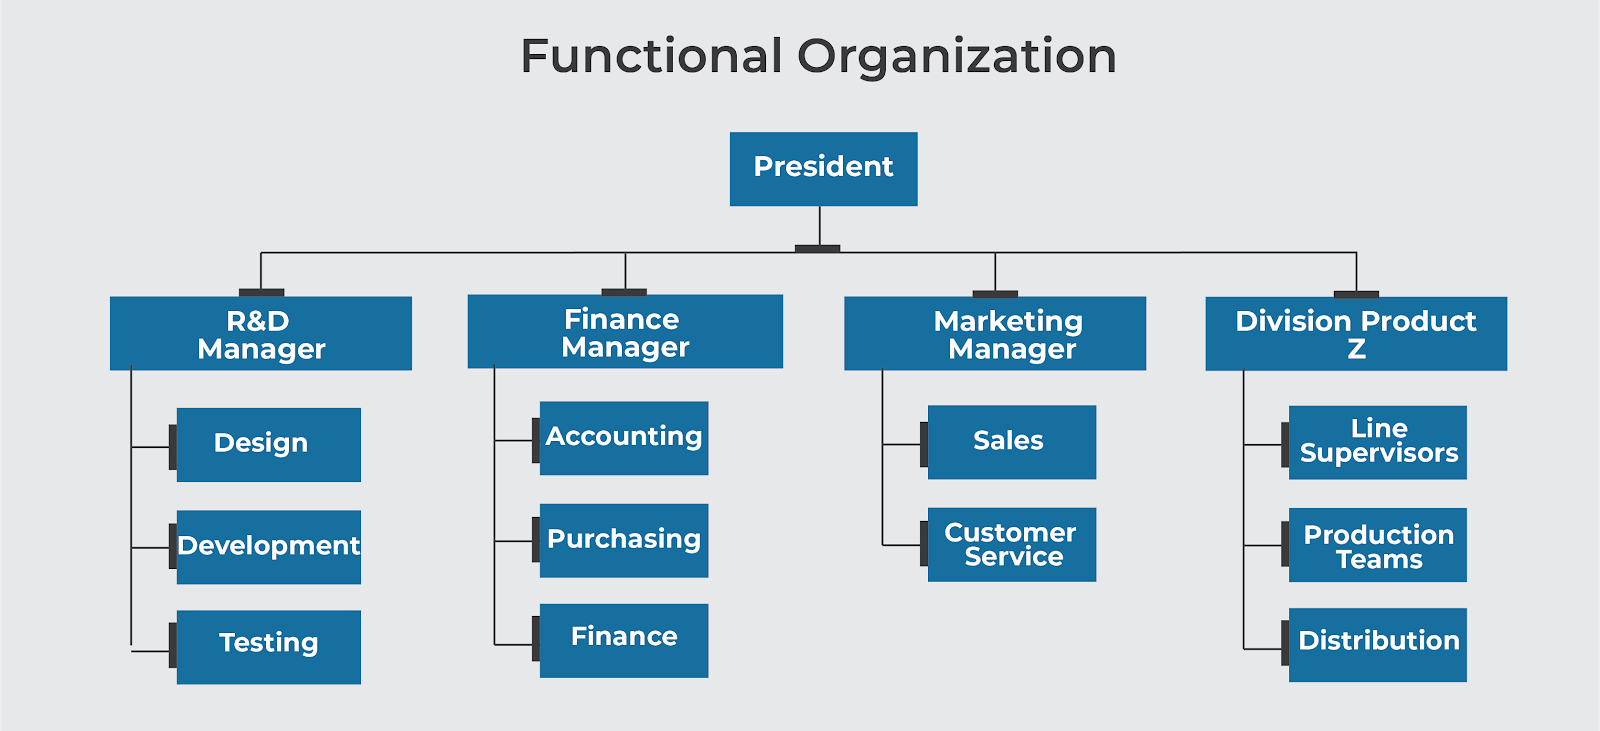 A Sample of Functional Organization Structure